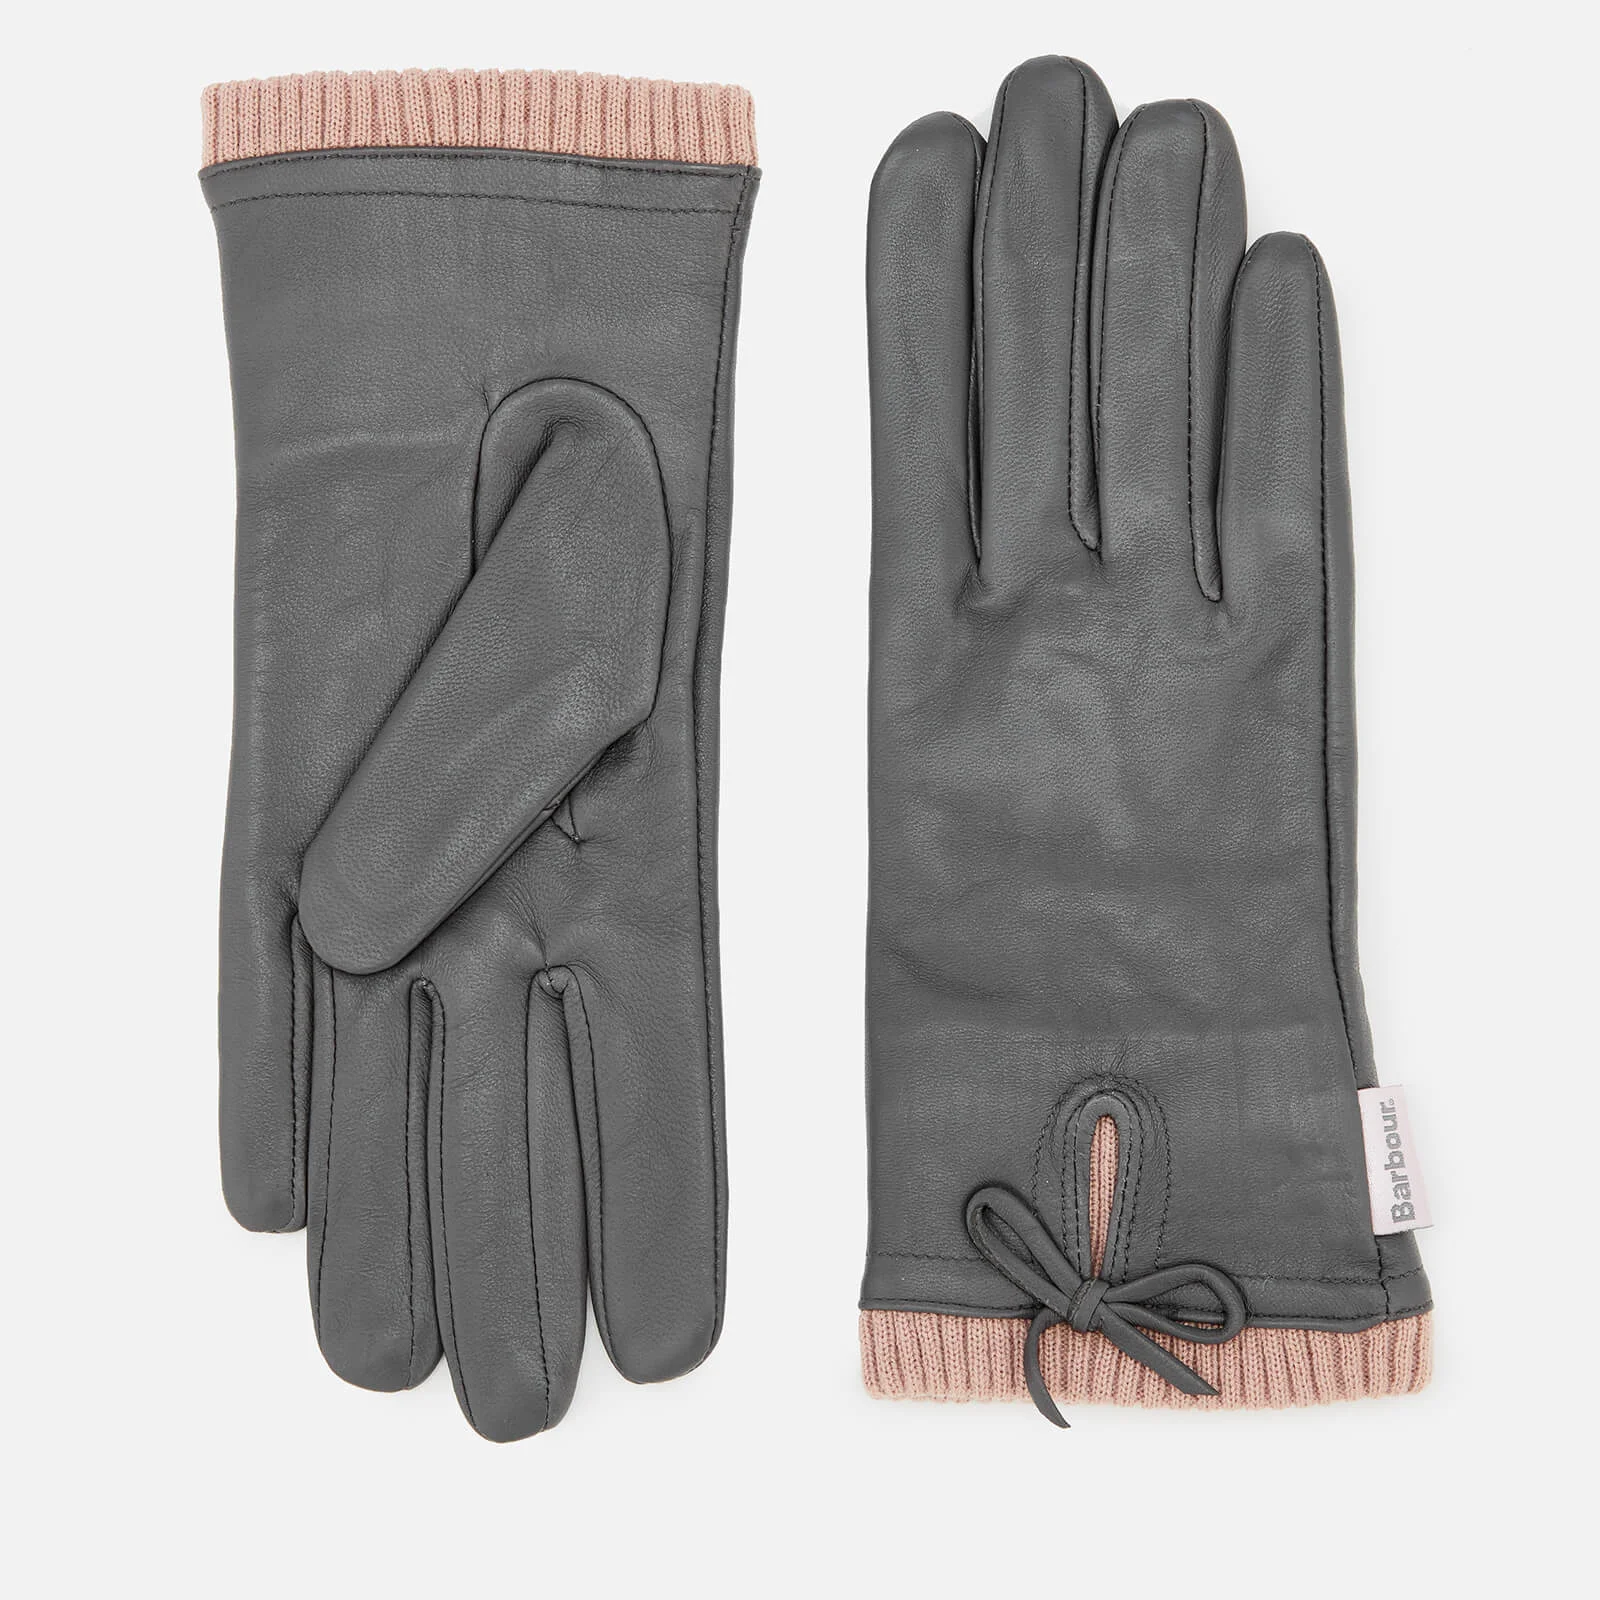 Barbour Women's Dovedale Gloves - Grey Image 1